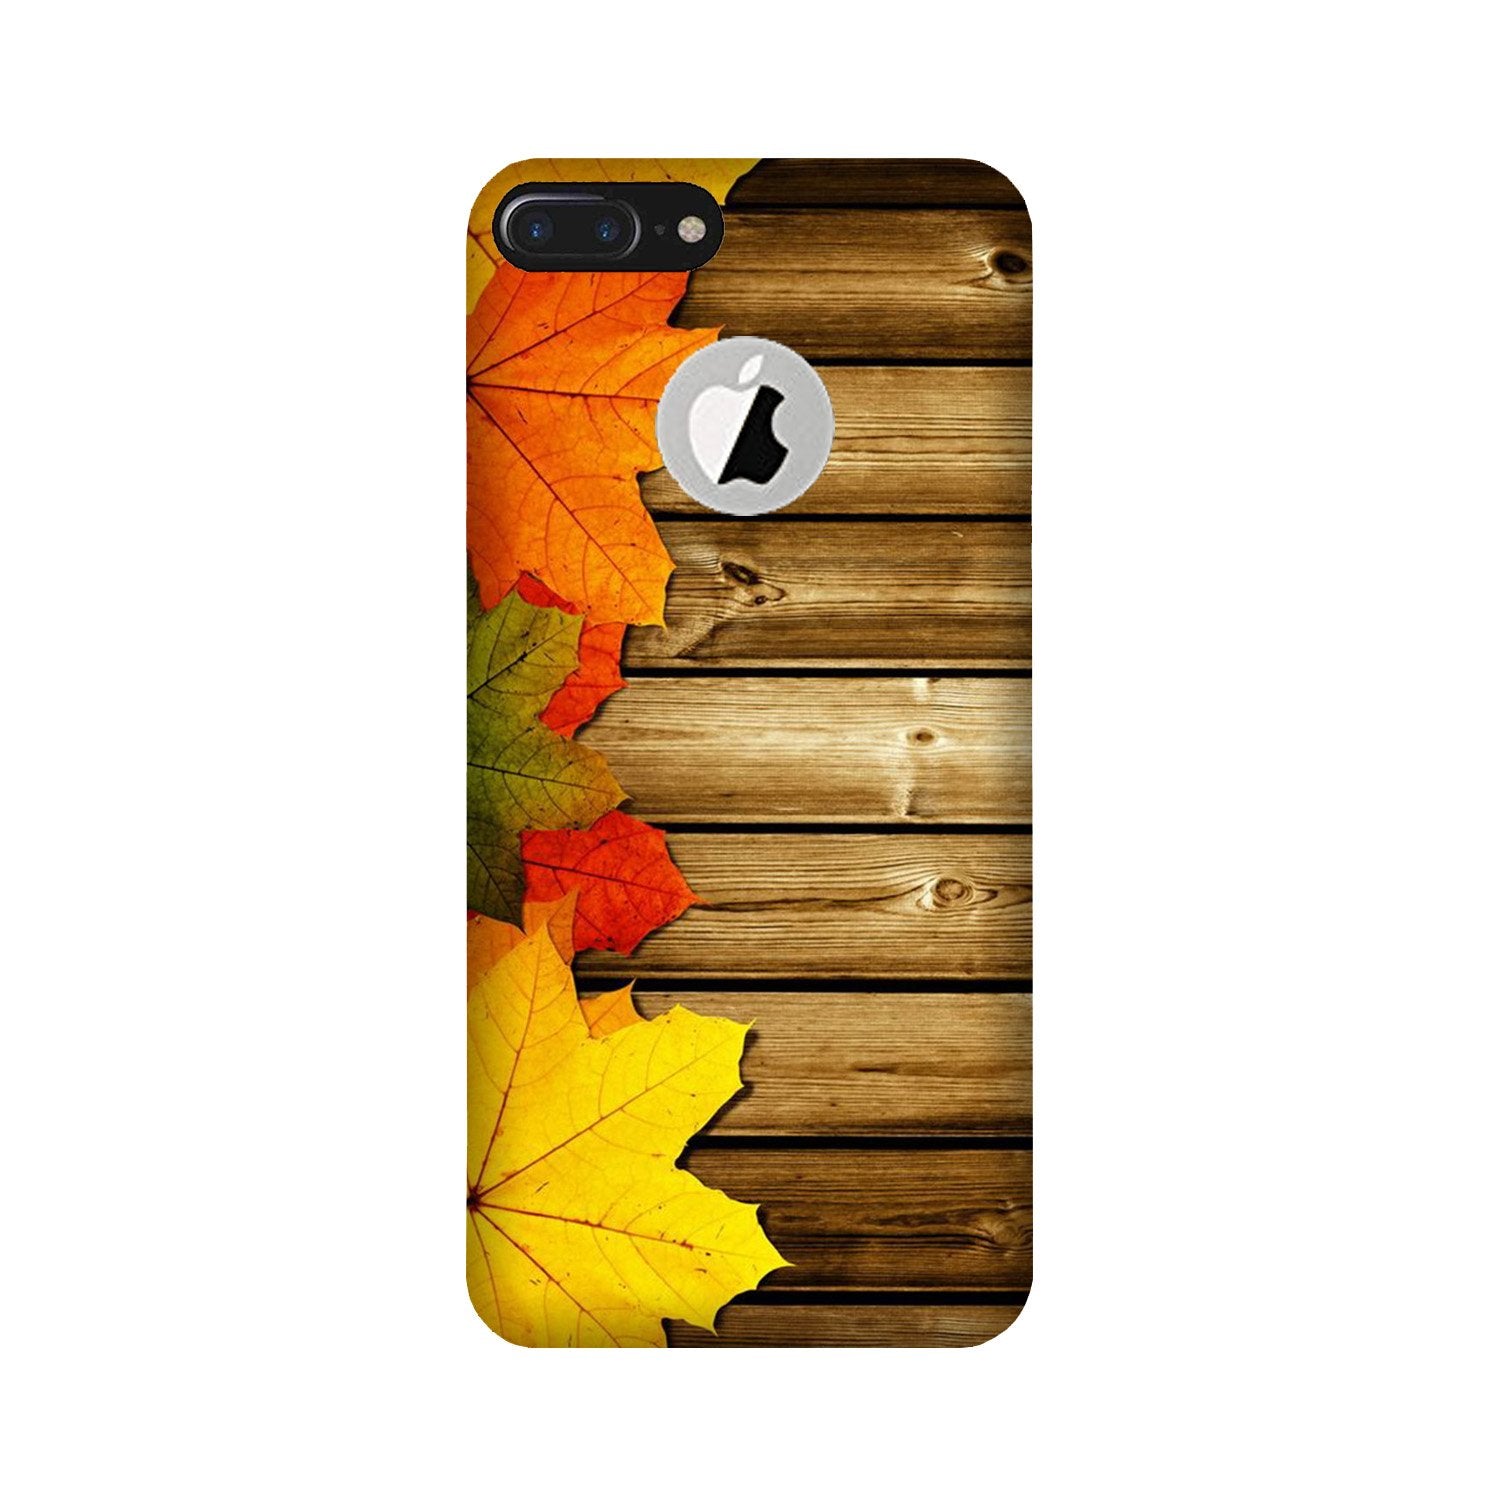 Wooden look3 Case for iPhone 7 Plus logo cut